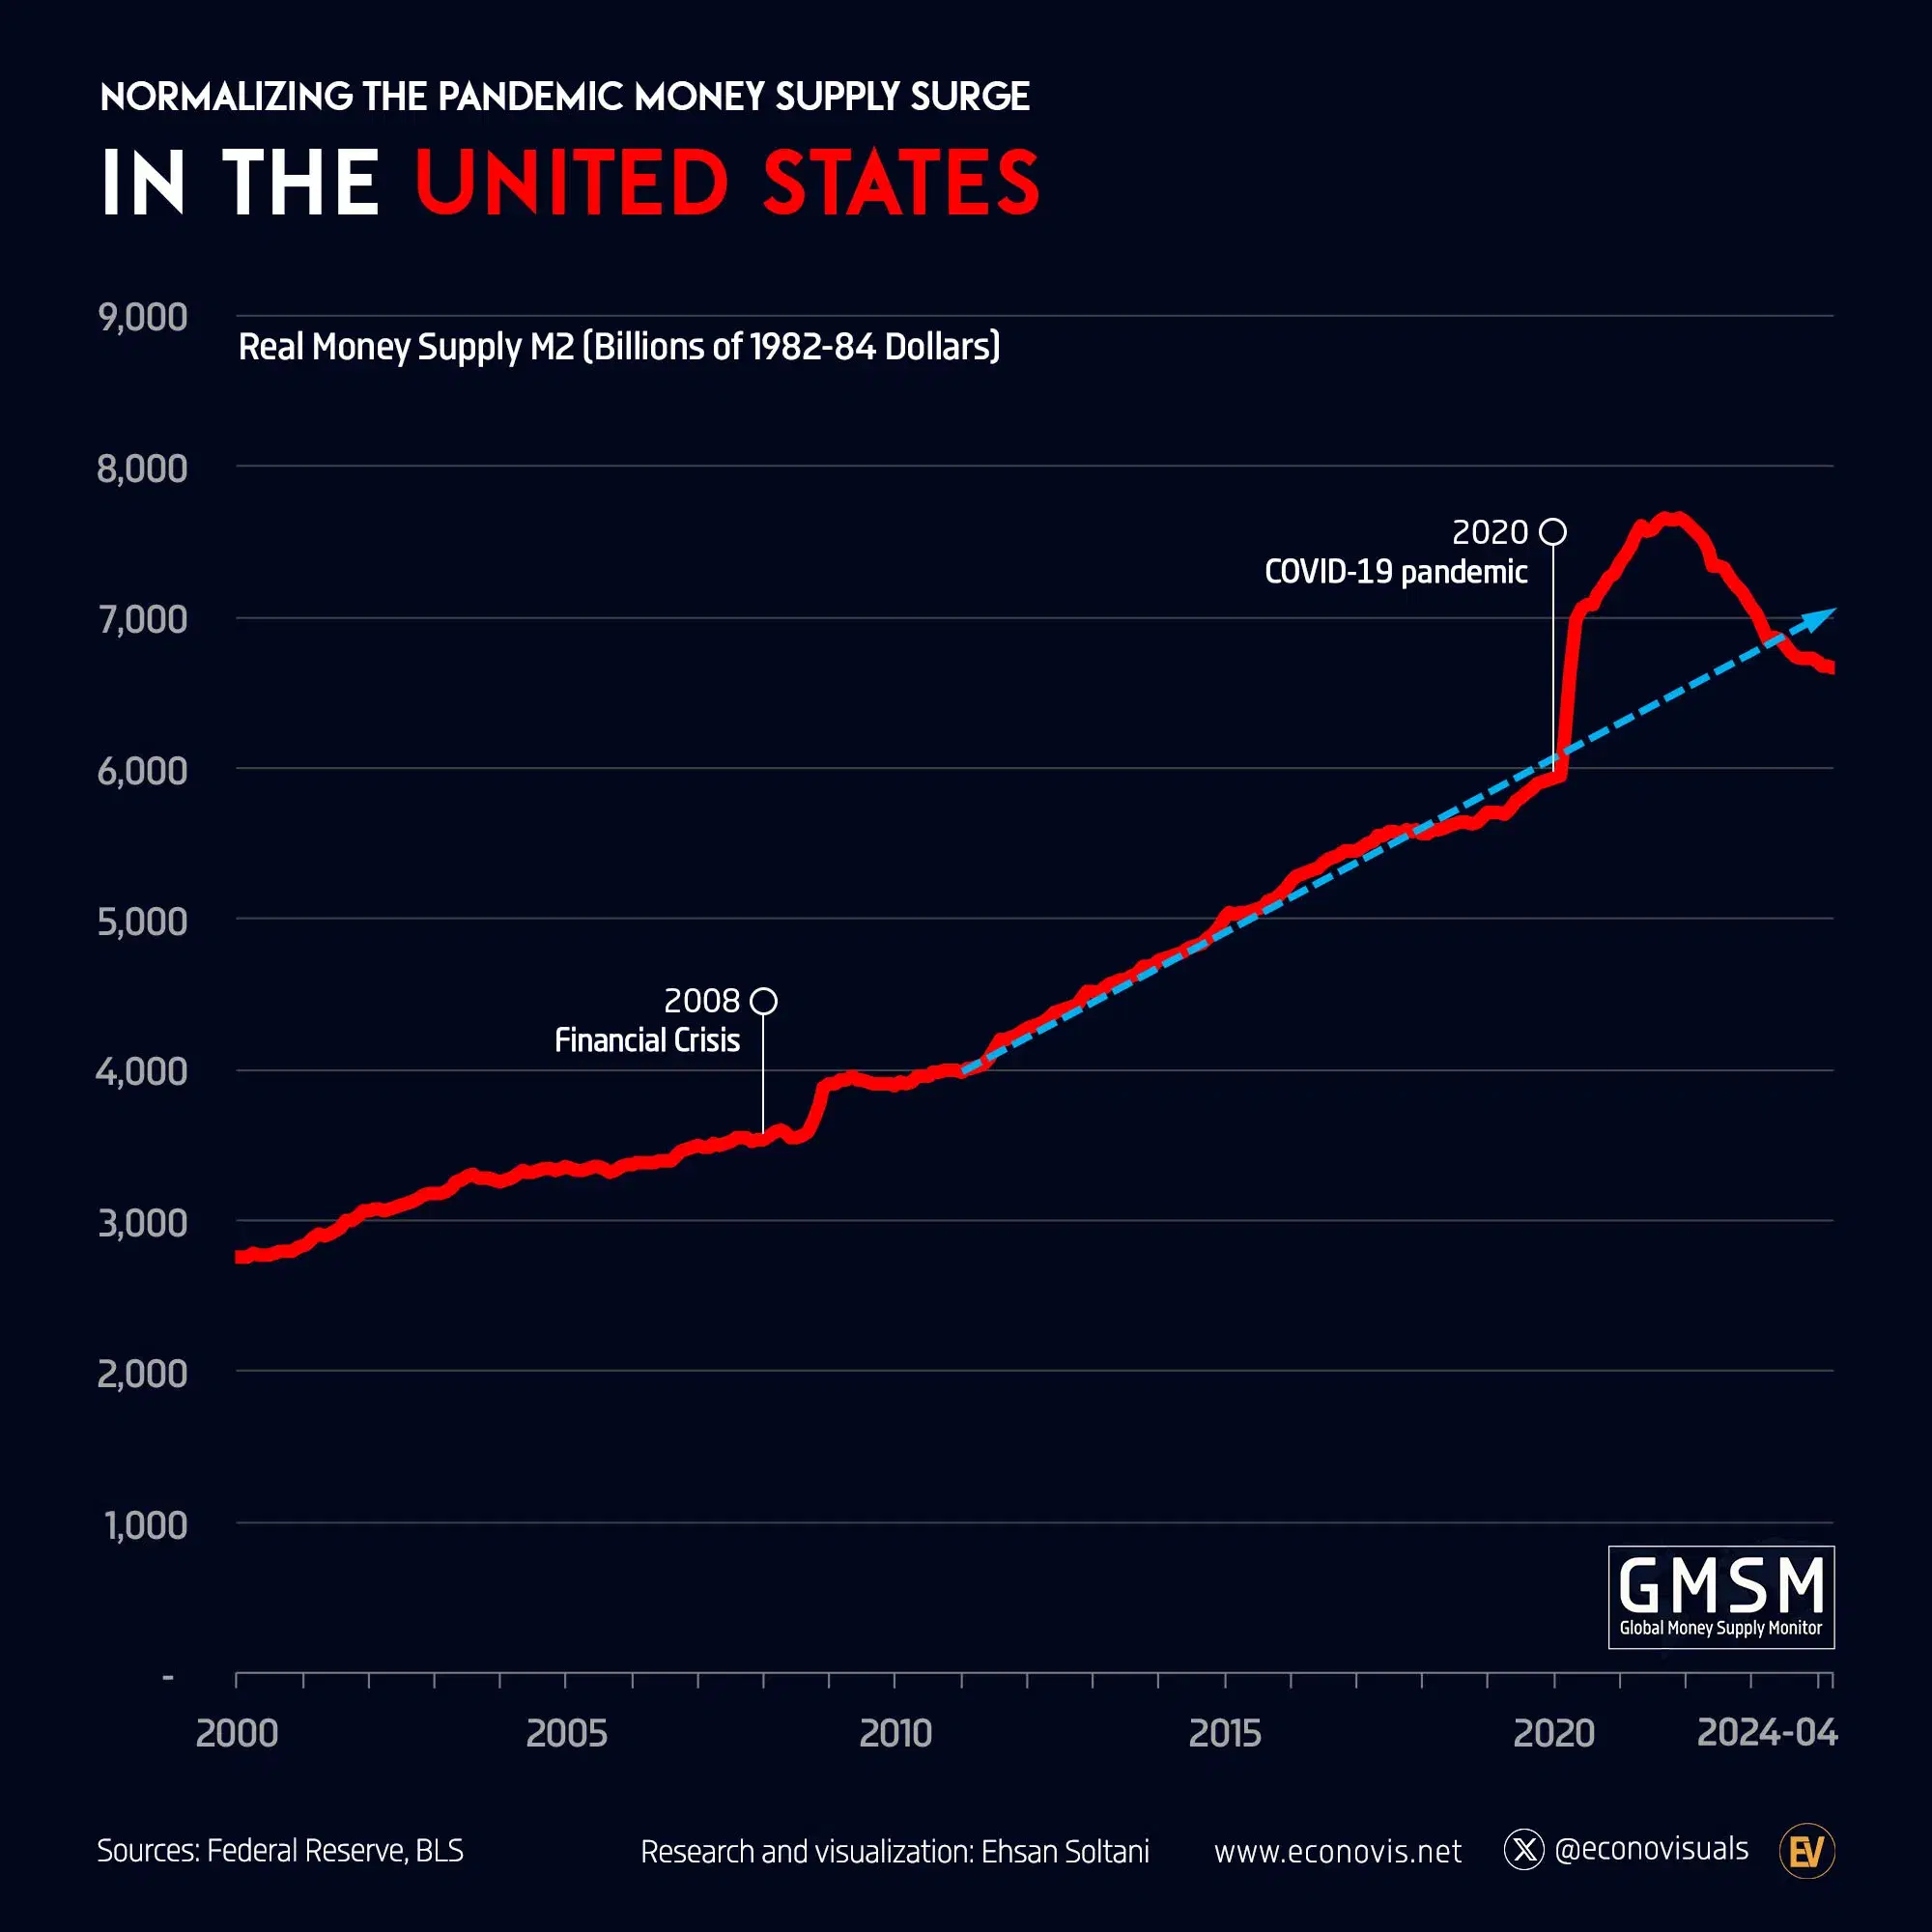 Normalizing the Pandemic Money Supply Surge in The United States